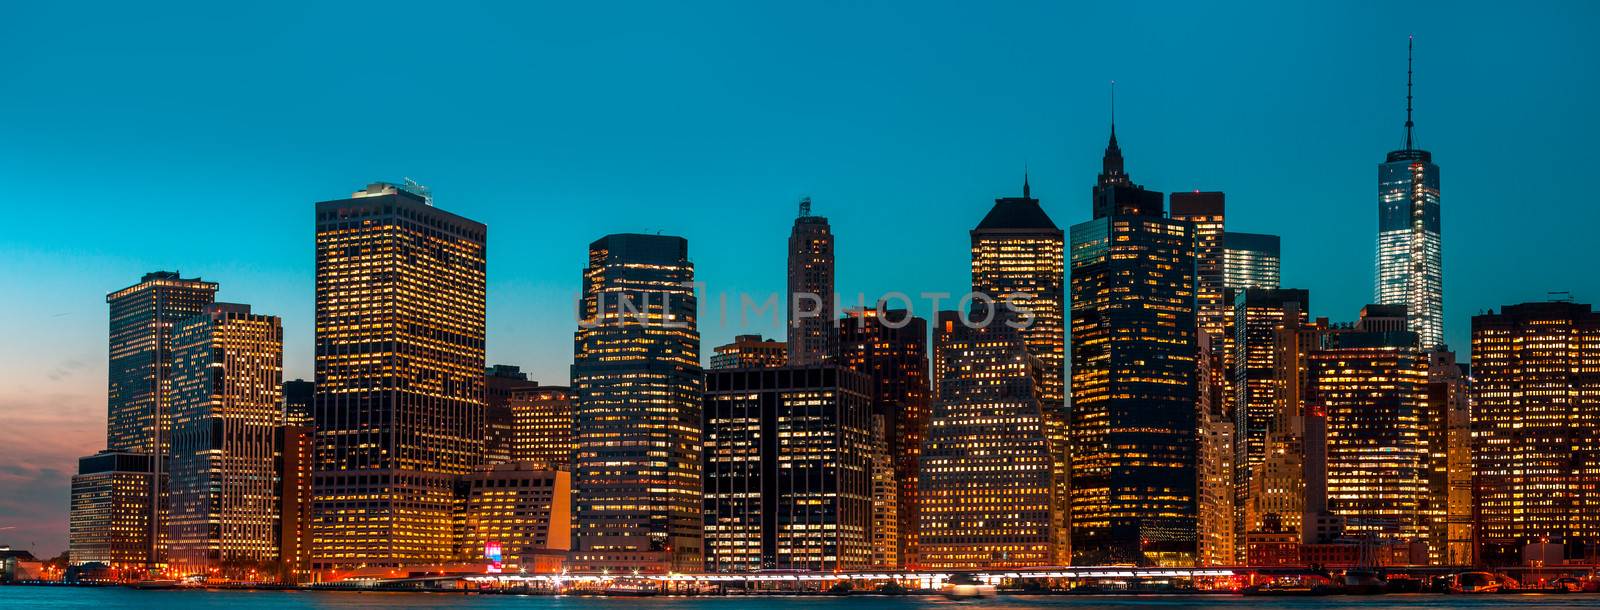 Manhattan at night with lights and reflections. New York City skyline